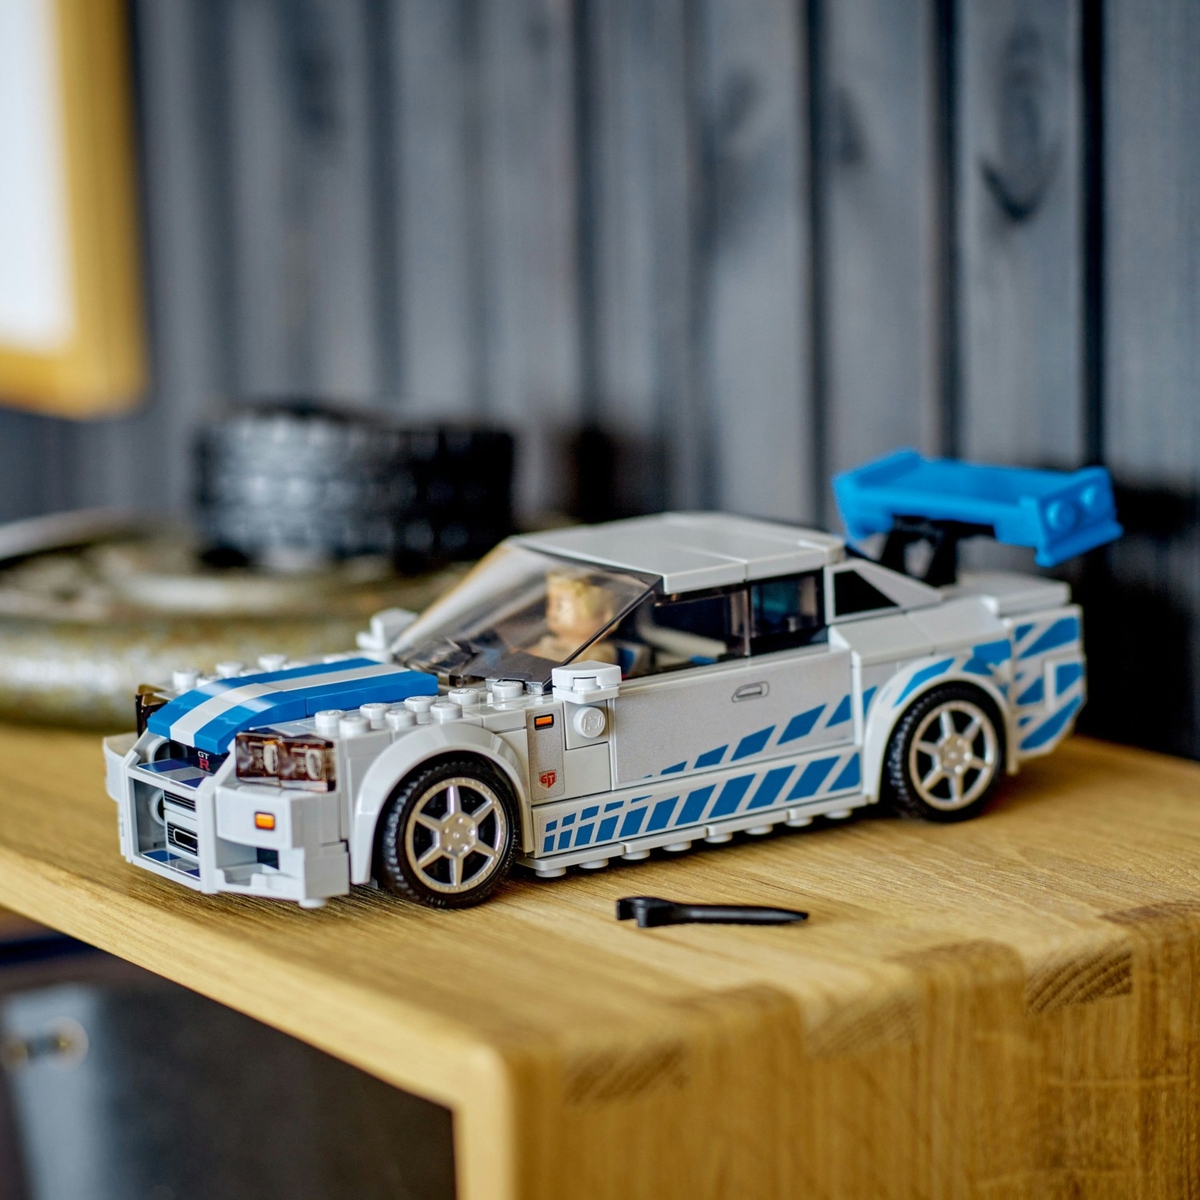 LEGO Speed Champions Fast and Furious Nissan Skyline GT-R(R34) - Thumbnail